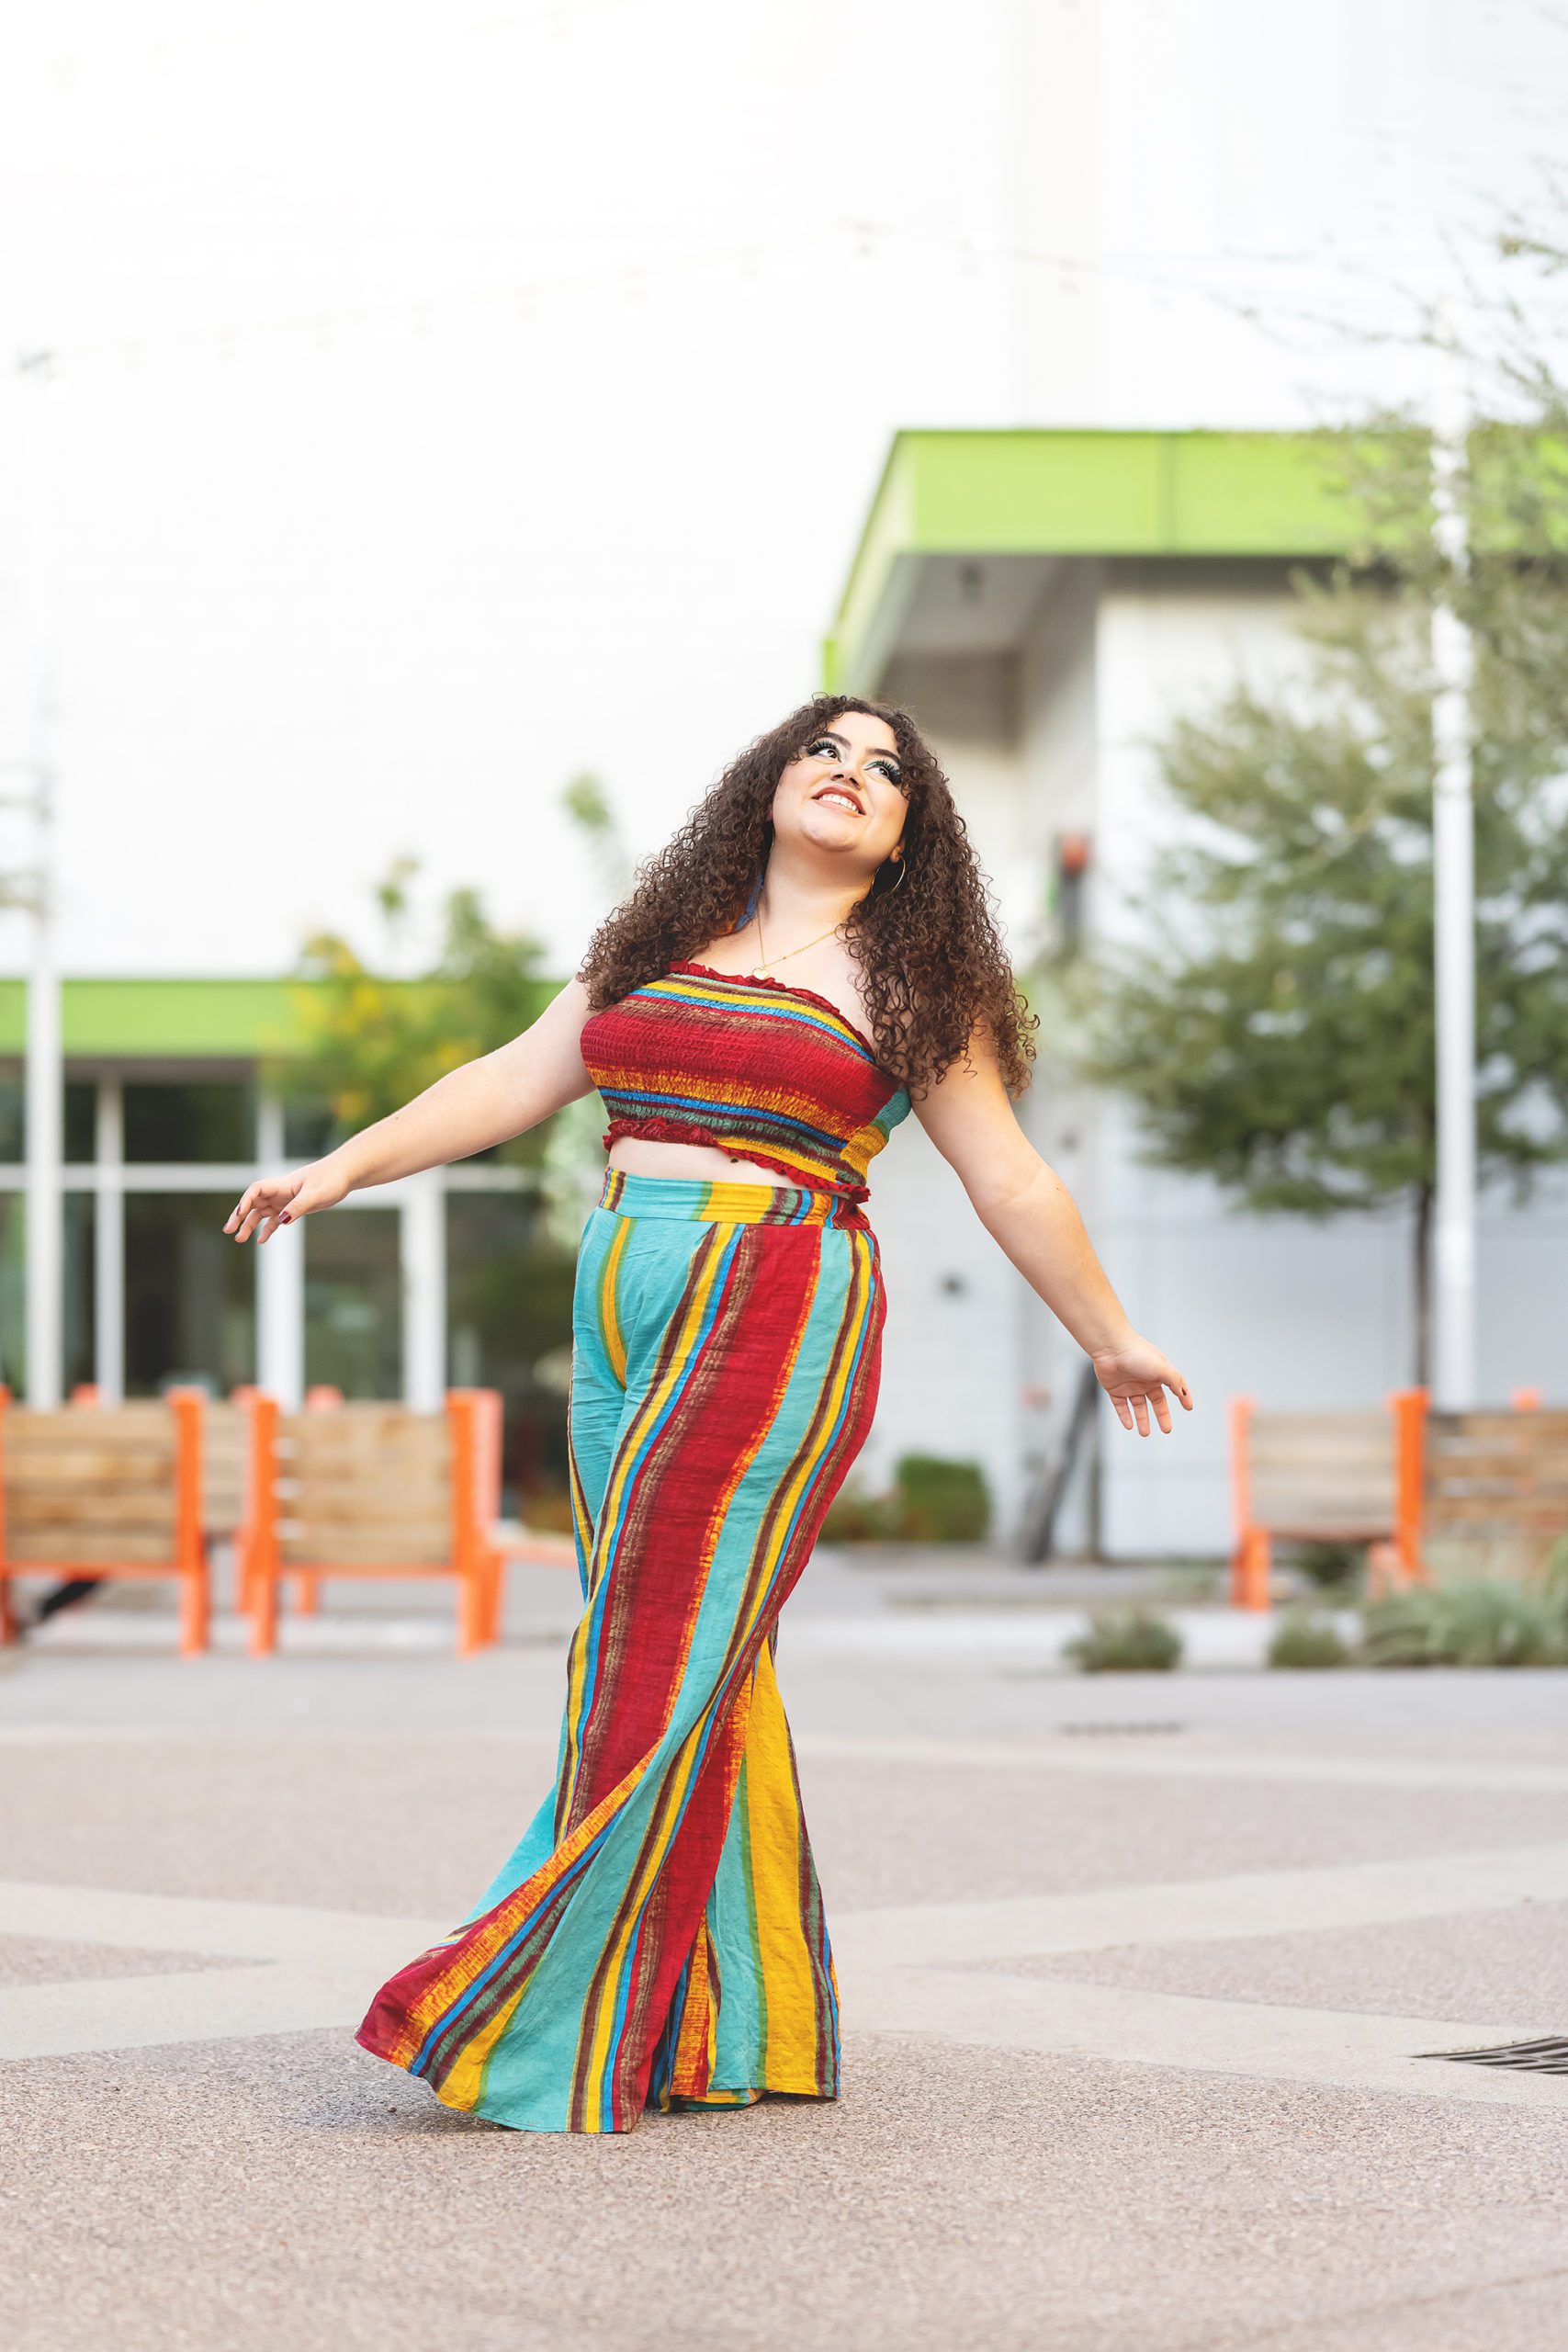 Chandler senior photographer girl kicking her legs in colorful outfit © Reaj Roberts Photography